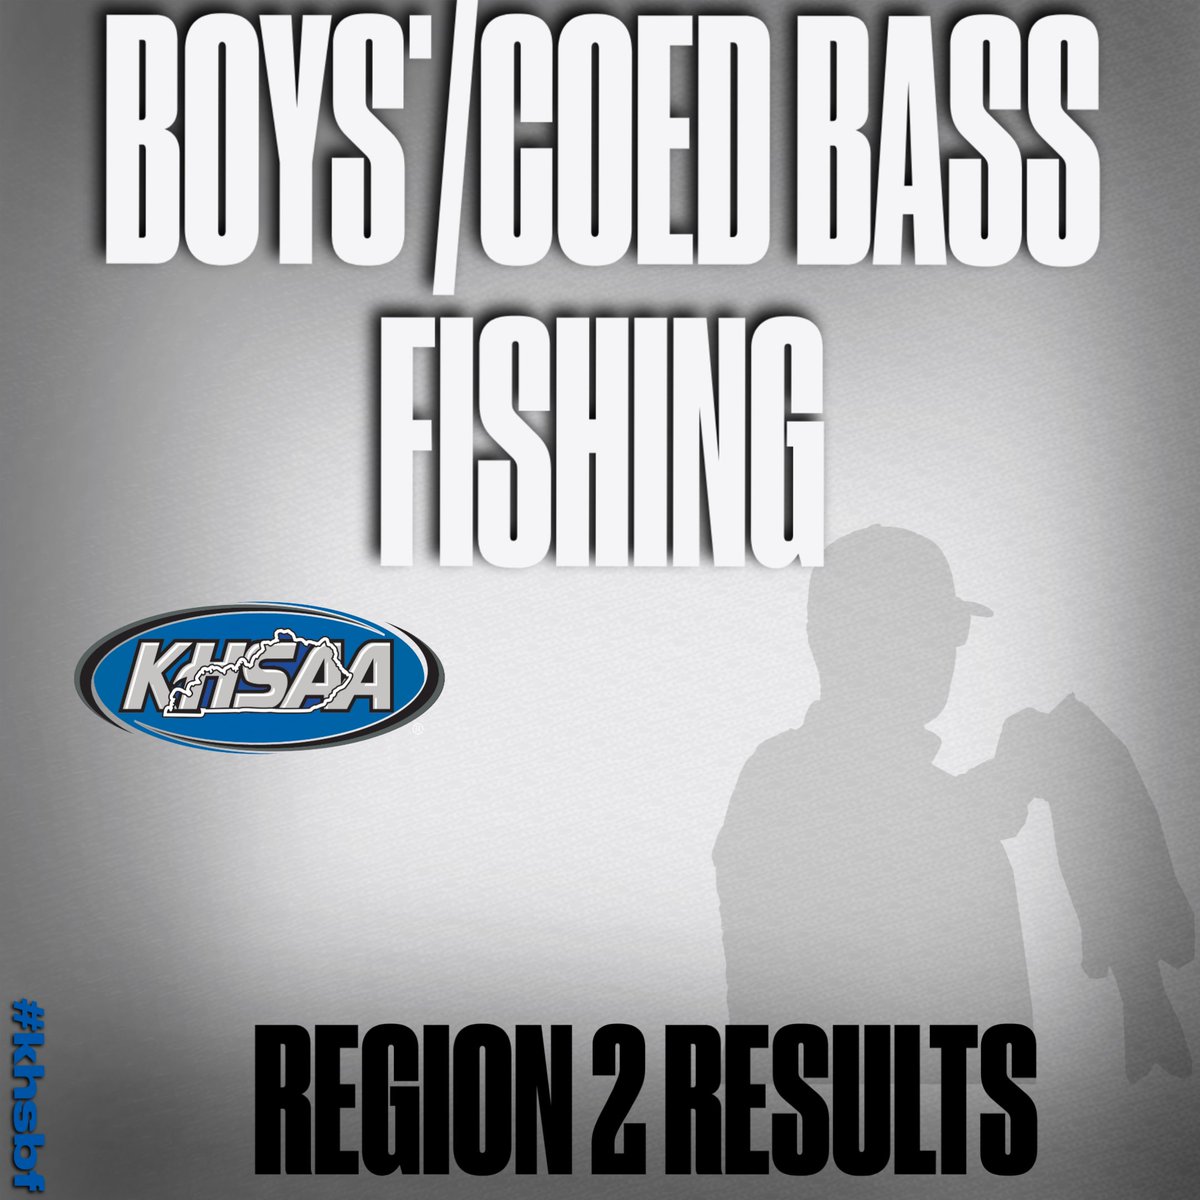 Check out Boys'/Coed Bass Fishing Region 2 results: khsaa.org/bassfishing/20…